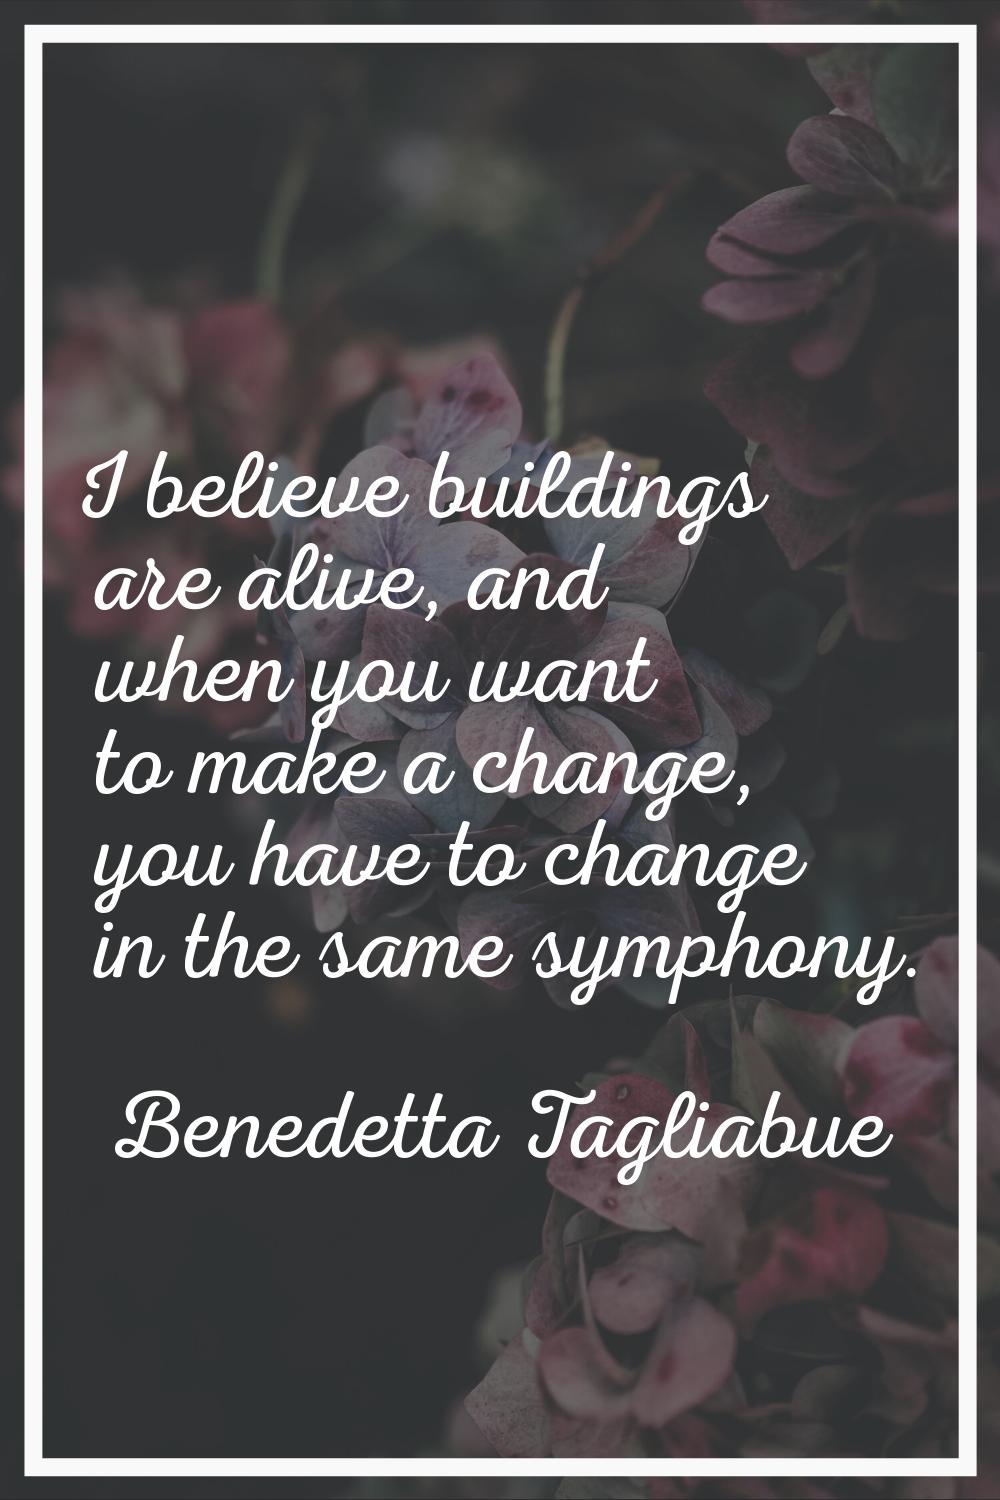 I believe buildings are alive, and when you want to make a change, you have to change in the same s